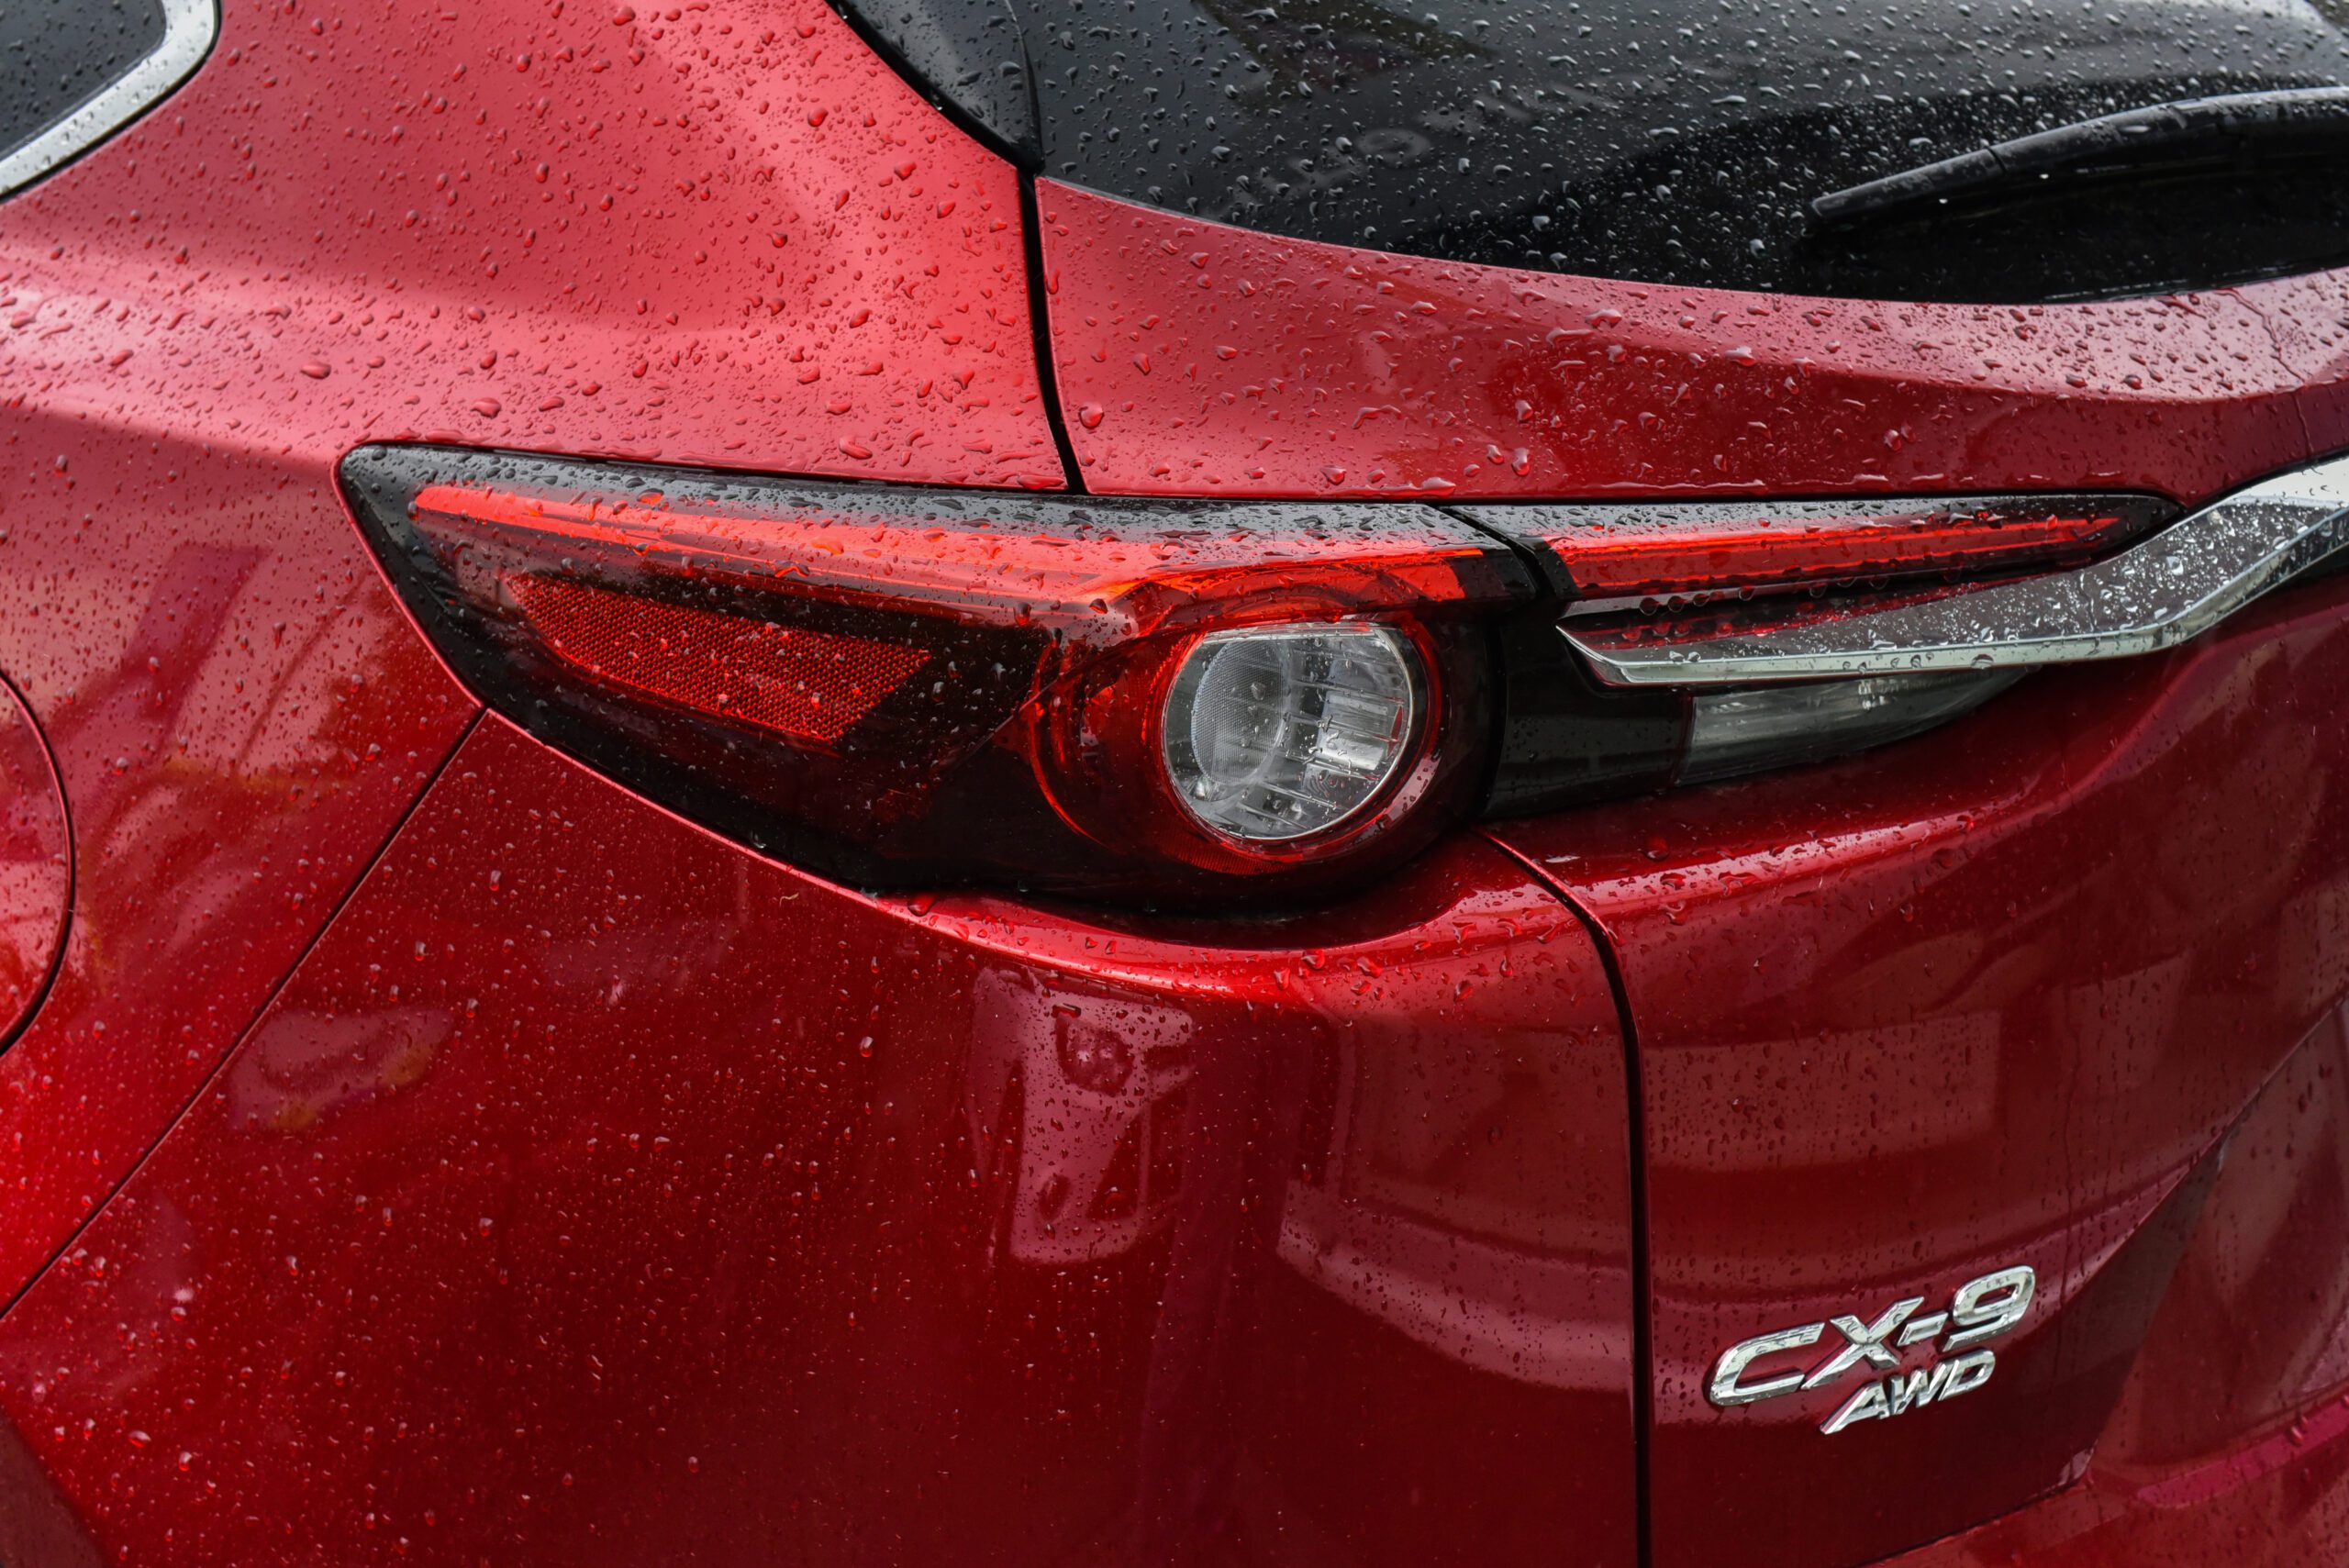 A putative class action alleges that Mazda has failed to provide a statutorily compliant emissions warranty